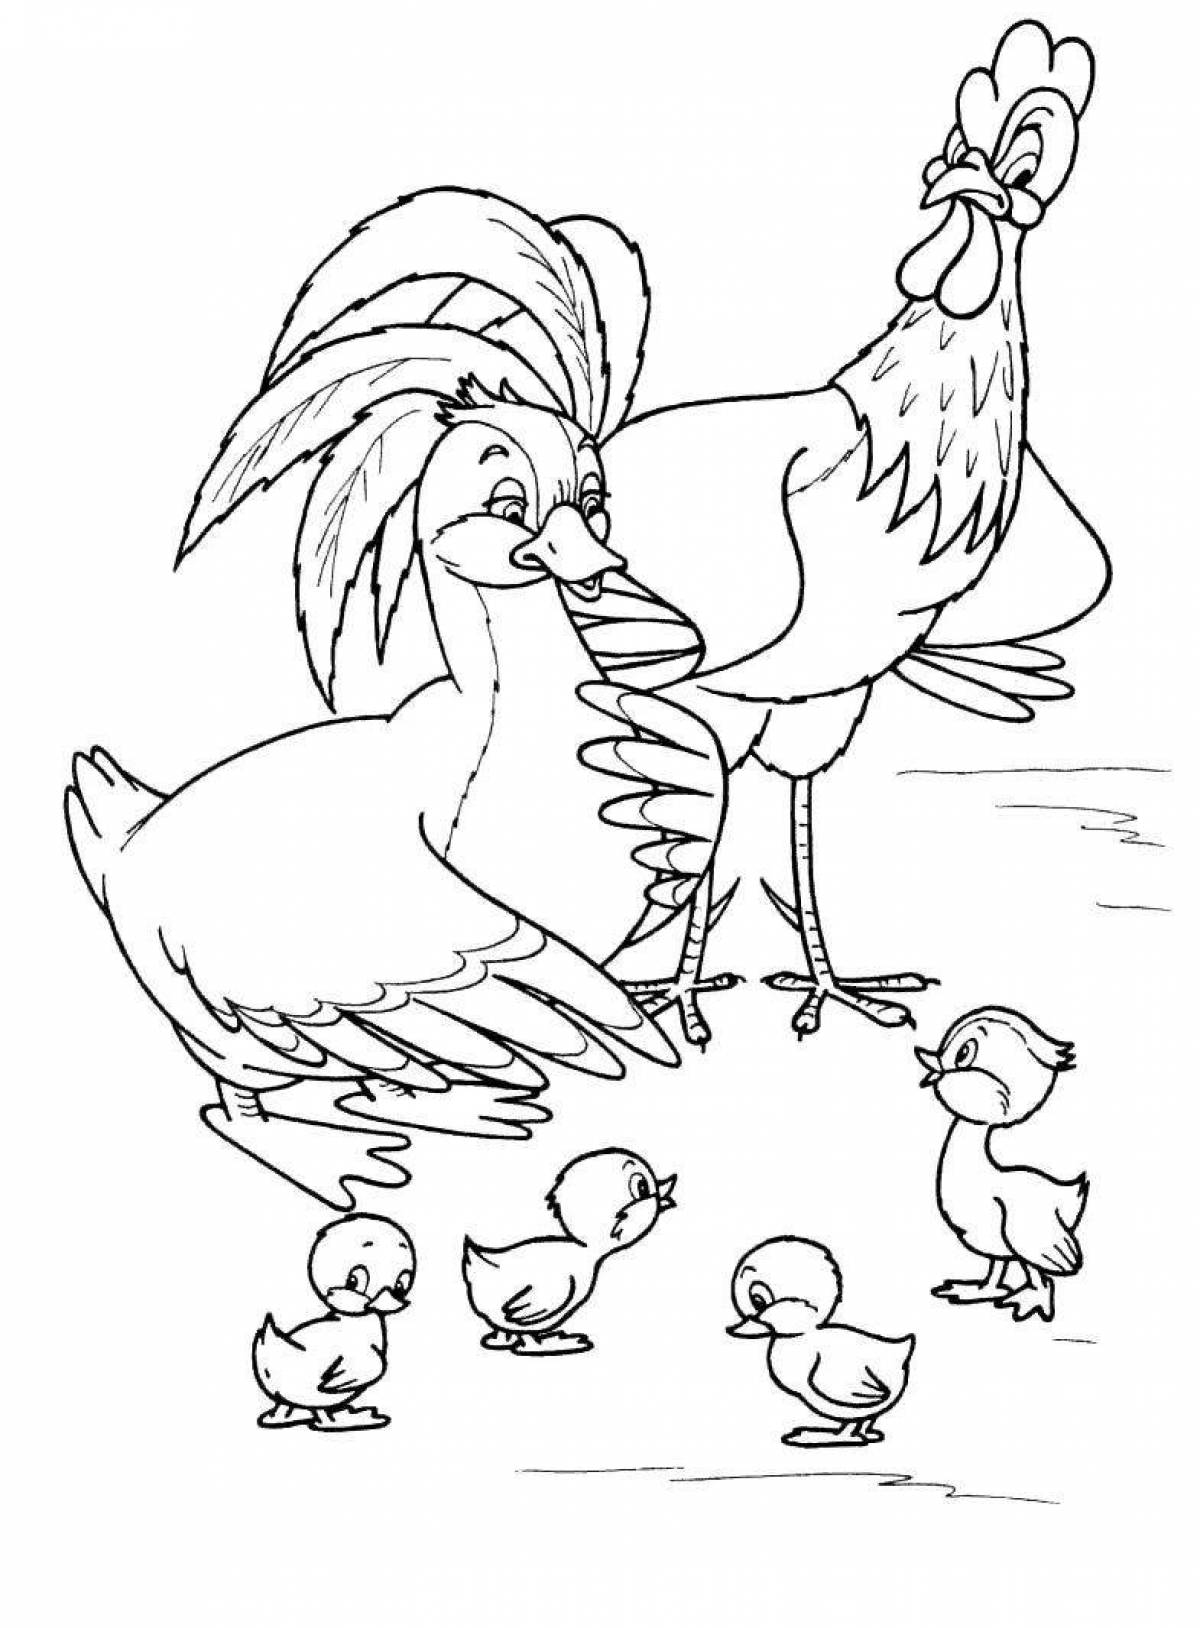 Charming ugly duckling coloring book for kids